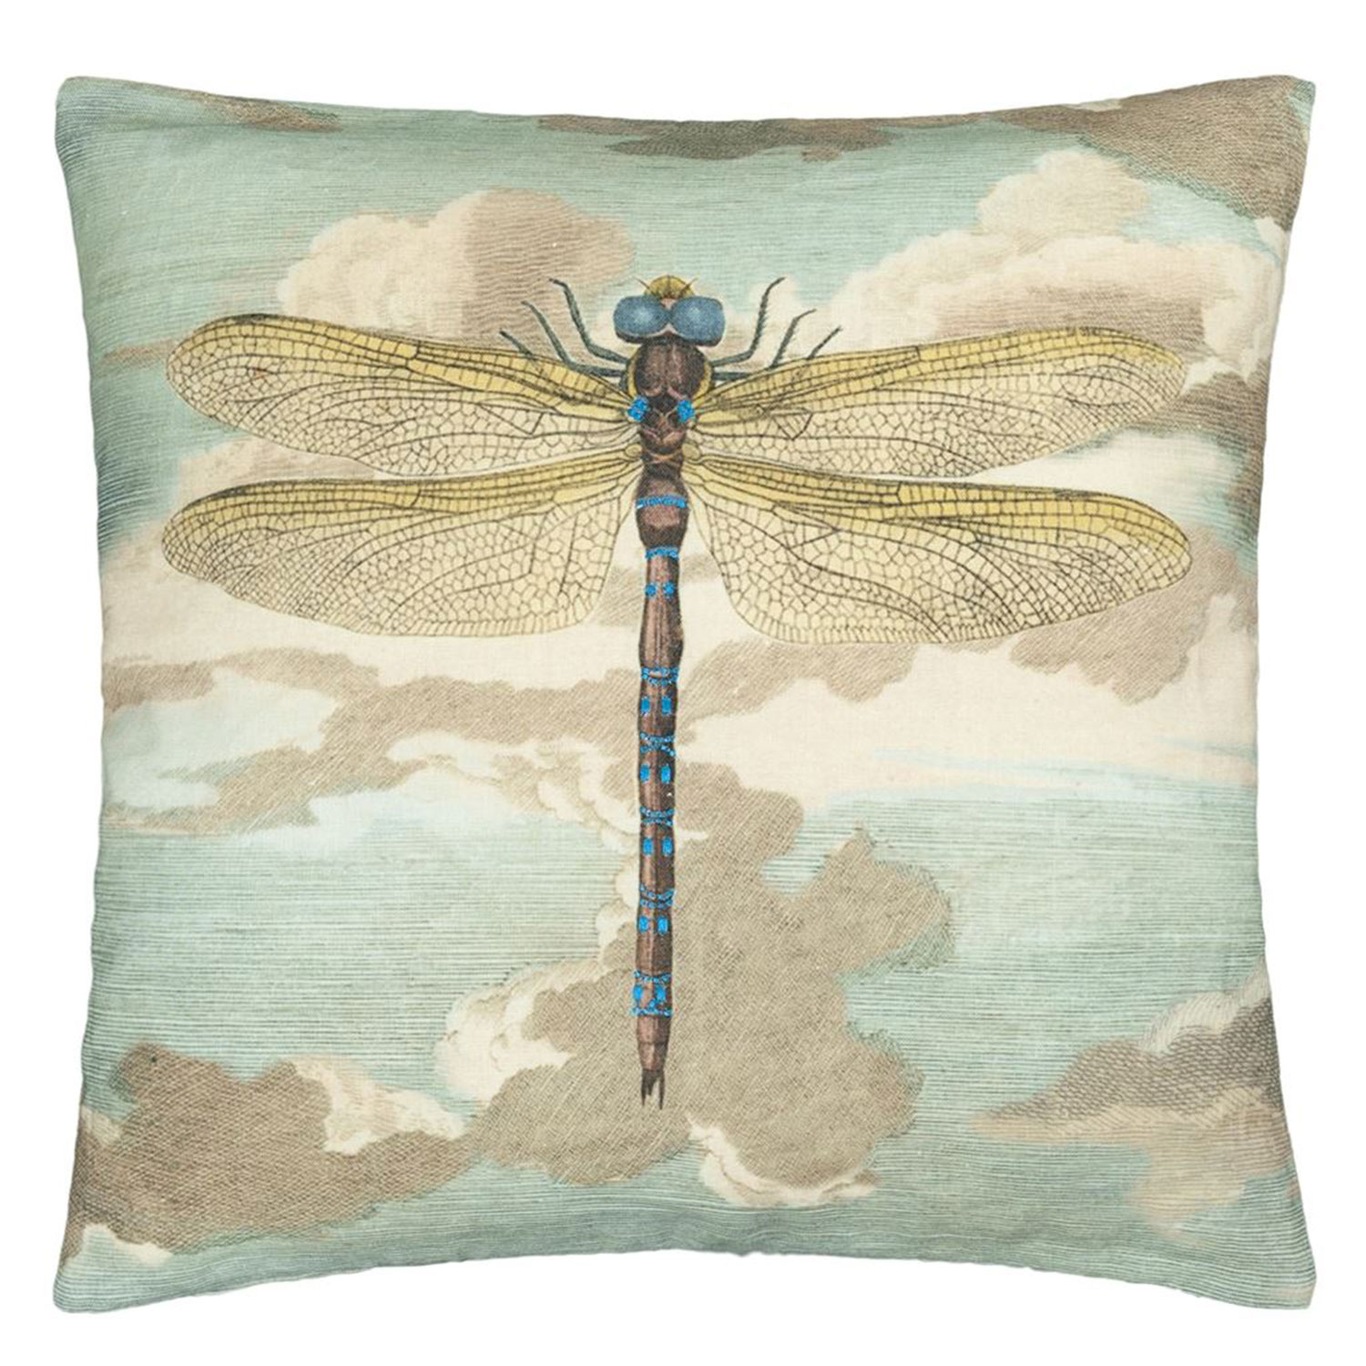 Dragonfly Over Clouds Pute 50x50 cm, Sky Blue